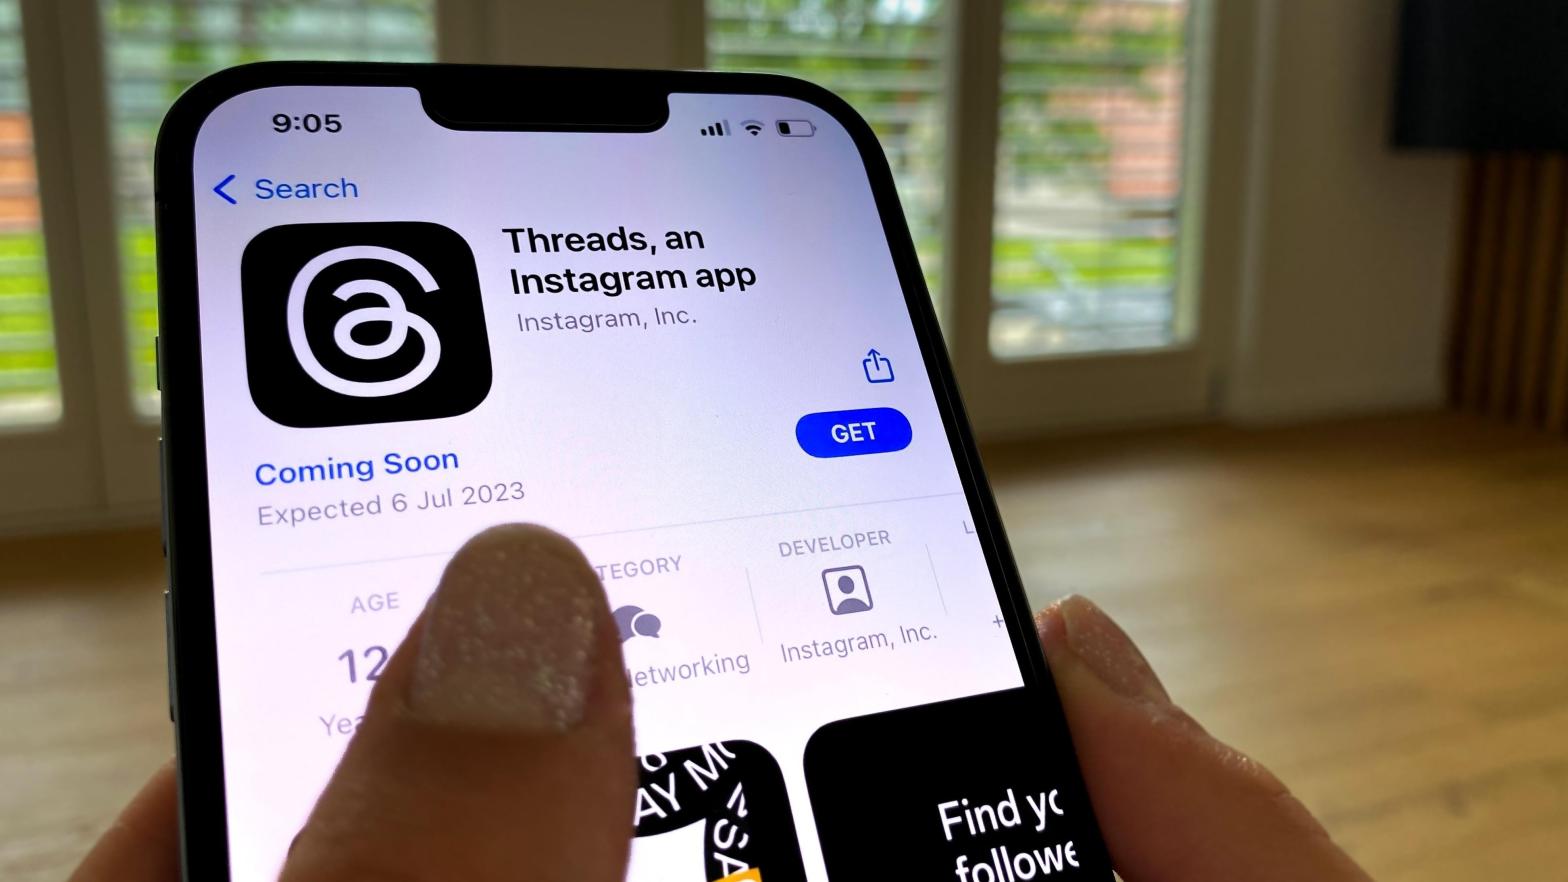 Meta's new app called Threads looks a hell of a lot like Twitter, but it might not include all of blue bird's functionality at release. (Photo: Adrian Tusar, Shutterstock)